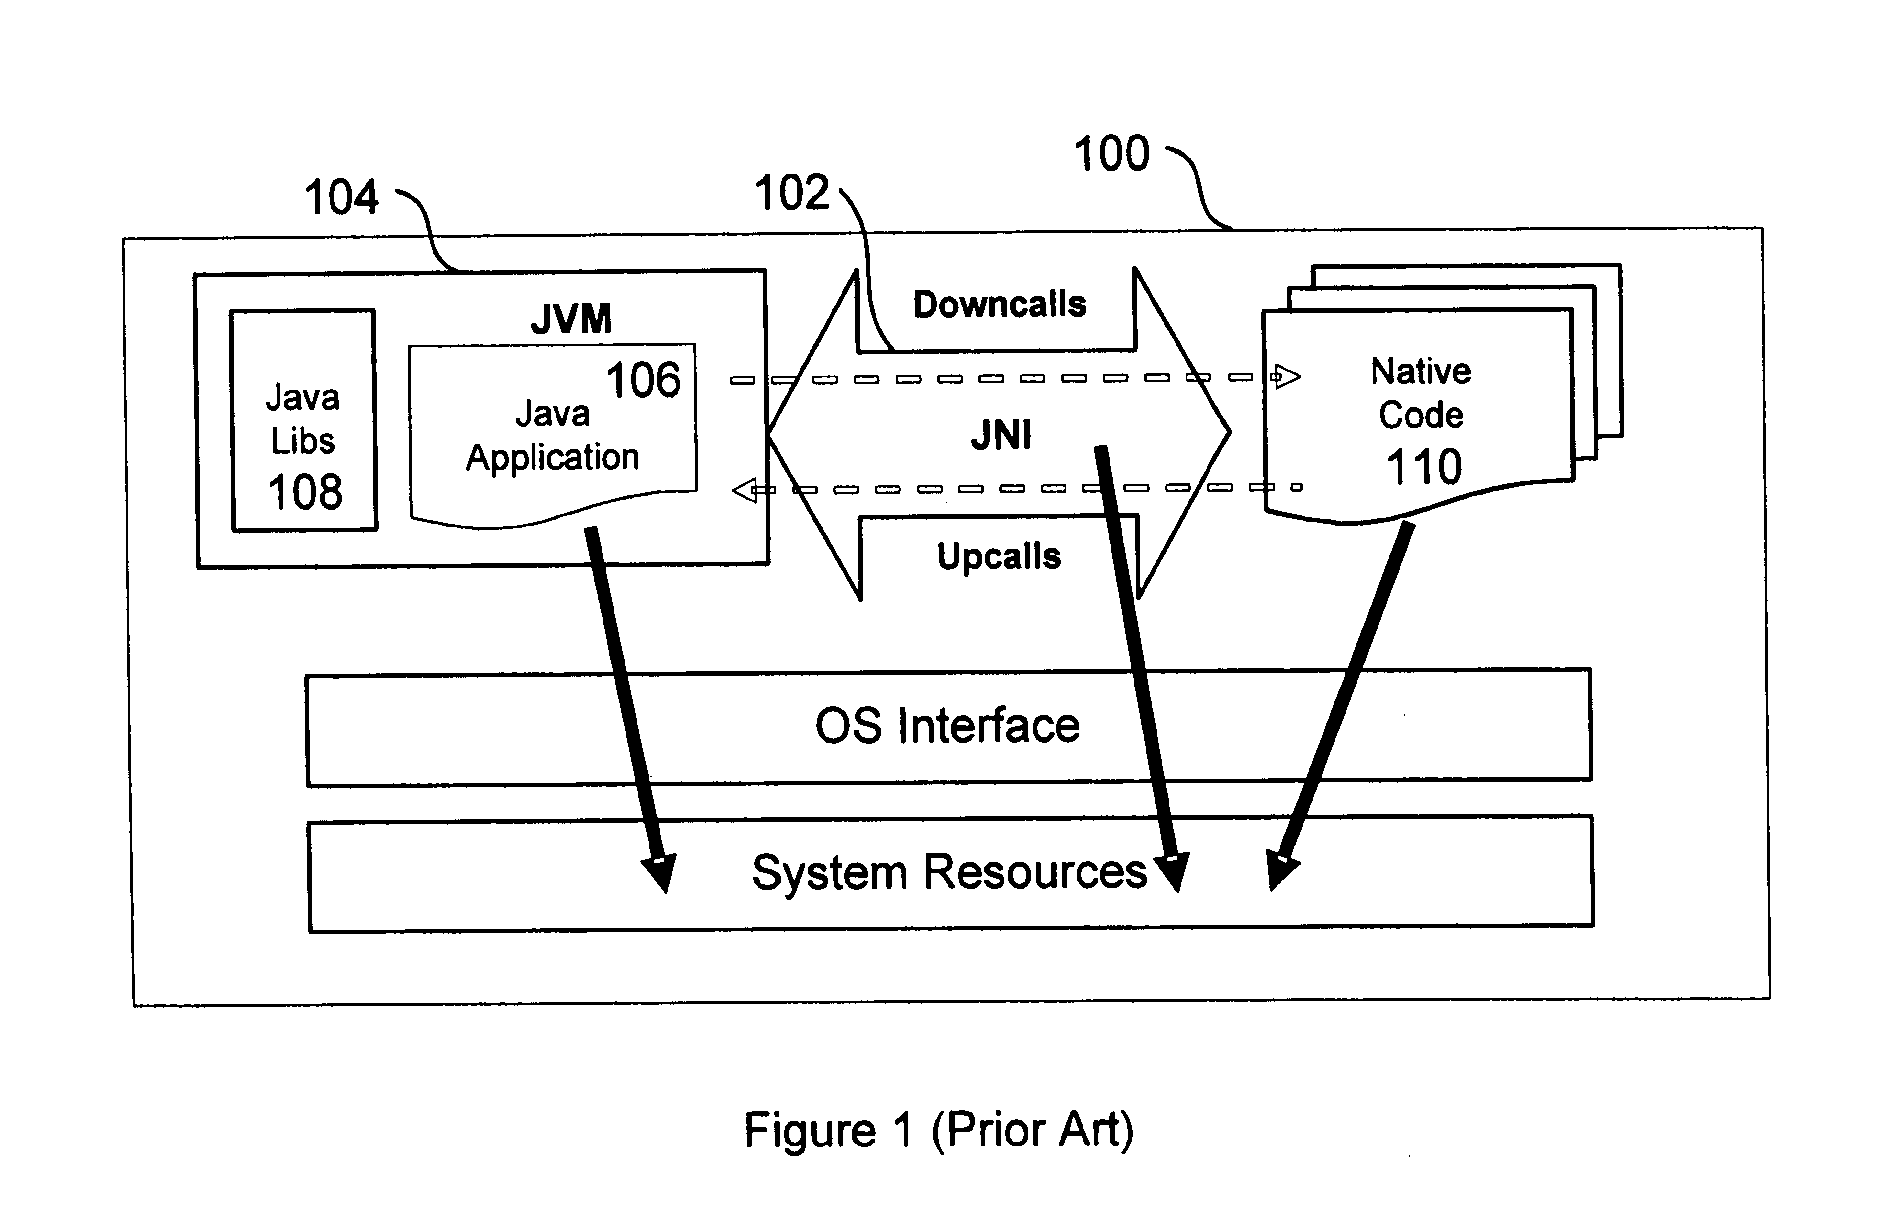 System and Method to Protect Java Bytecode Code Against Static And Dynamic Attacks Within Hostile Execution Environments